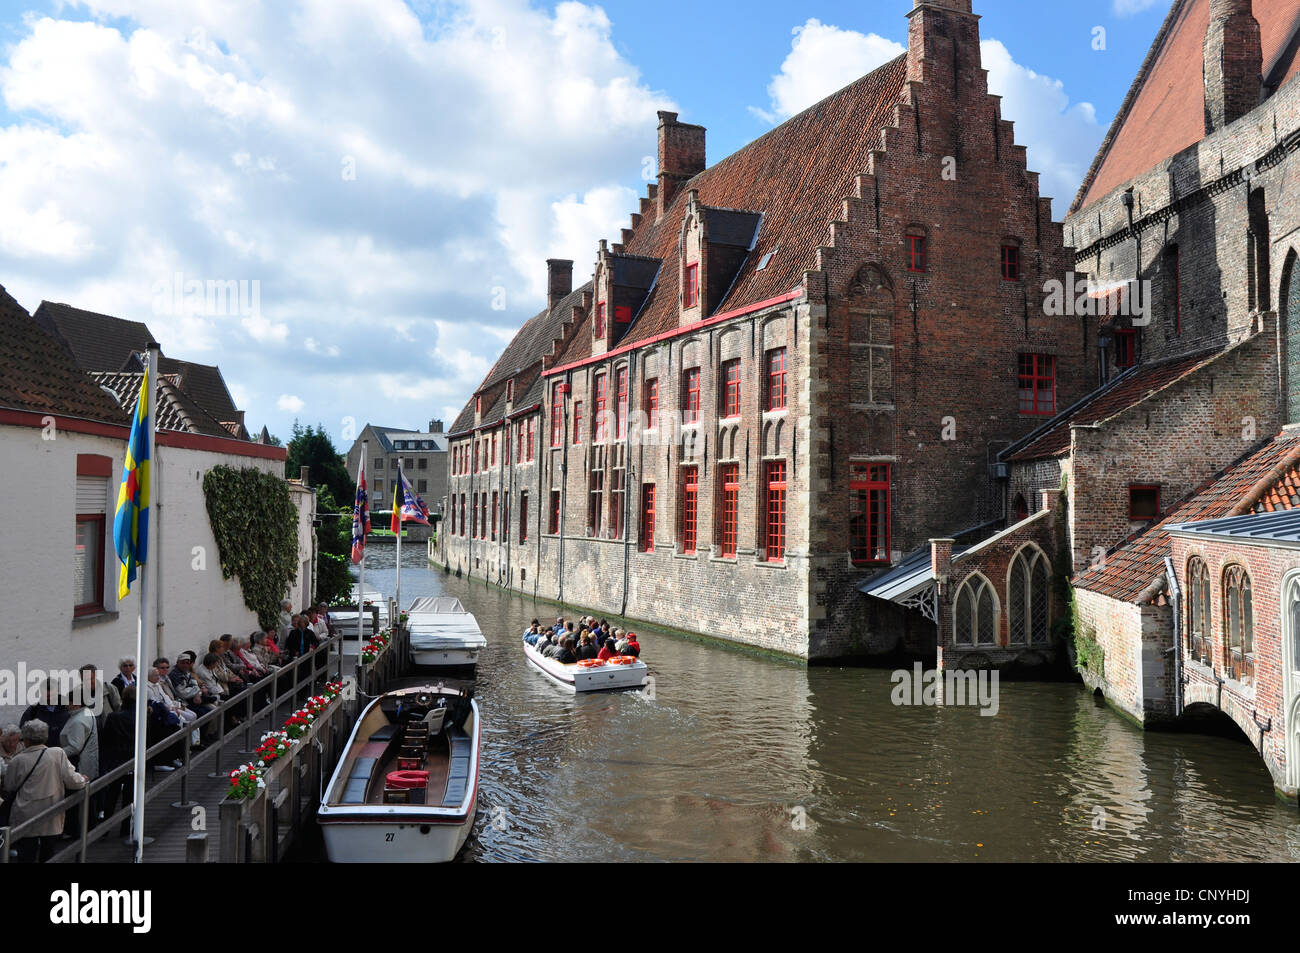 Belgio - Bruges - canal tour in barca station - Stoofstraat - dall'ospedale San Giovanni e museo Memling edifici Foto Stock